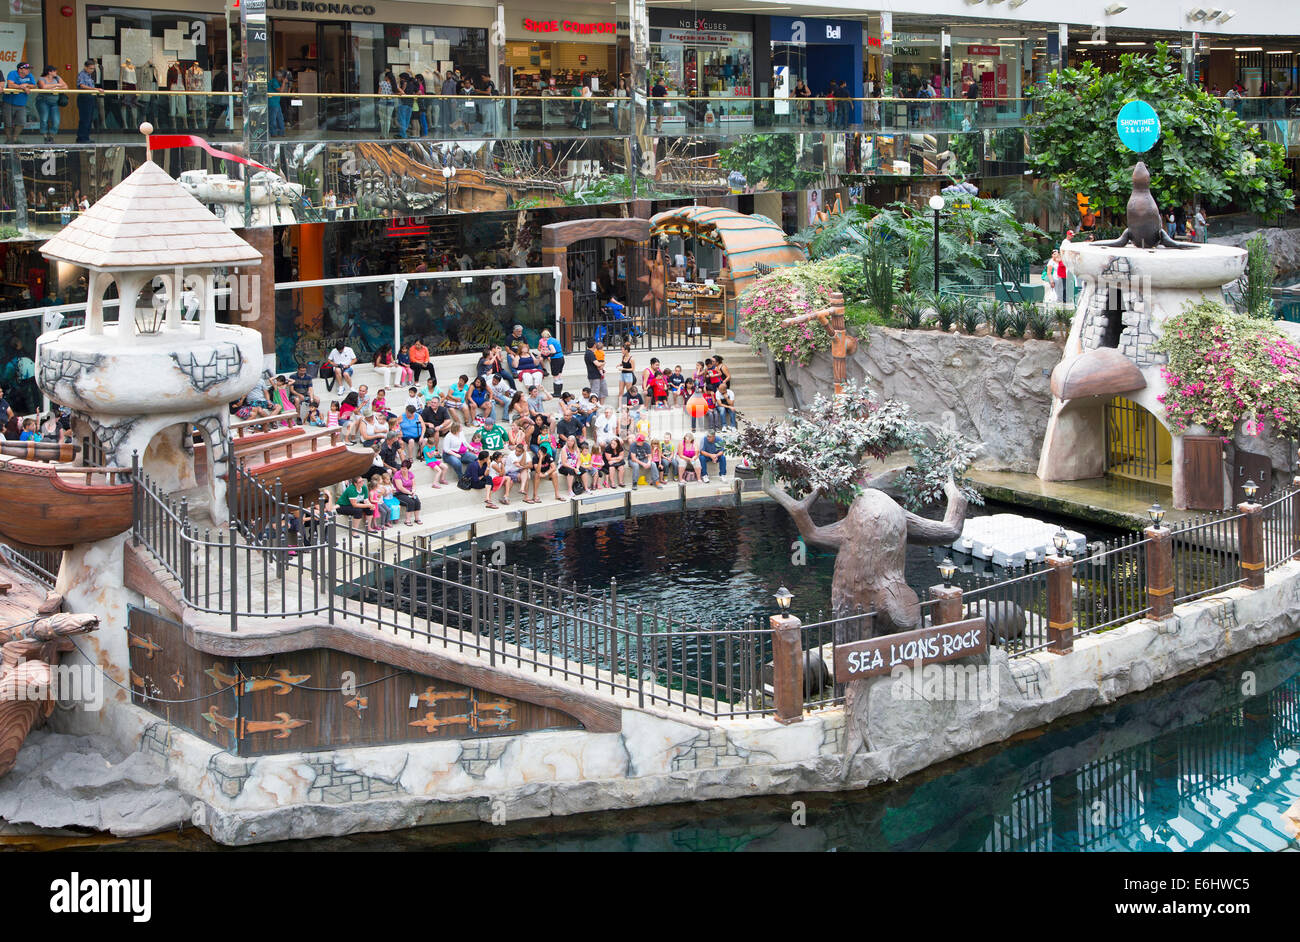 45 Photos That Will Make You Want Some Fun At West Edmonton Mall